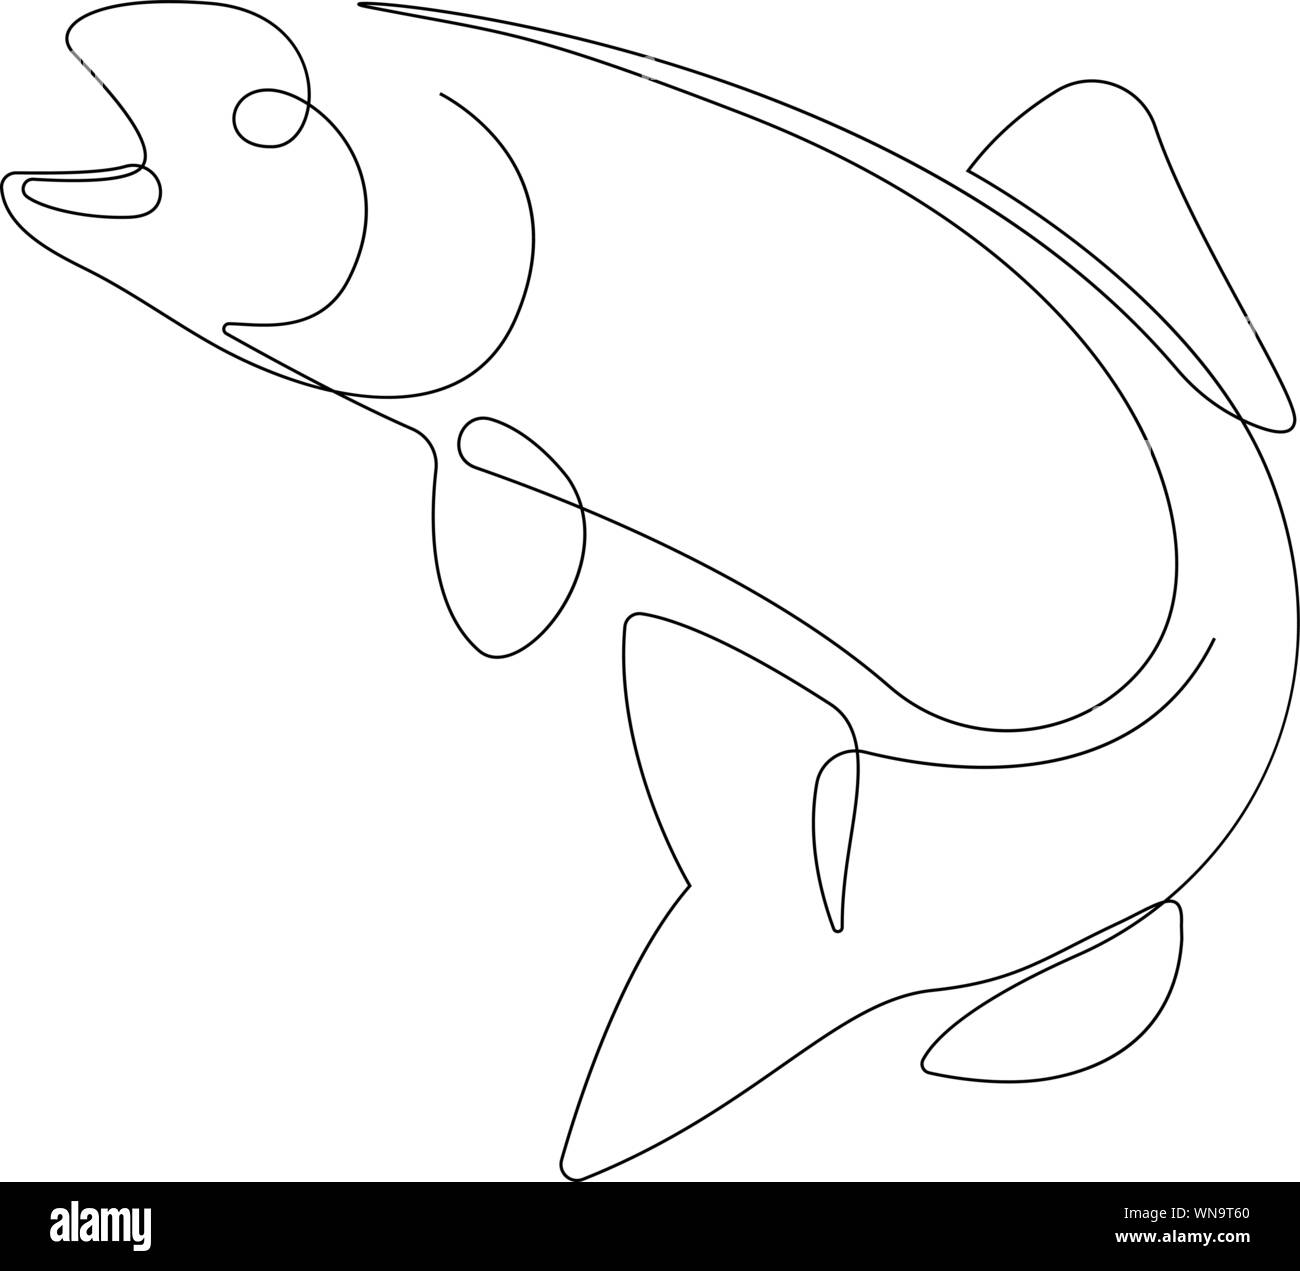 One single line drawing of big salmon or trout for logo identity. Large lake fish mascot concept for fishing tournament icon. Stock Vector